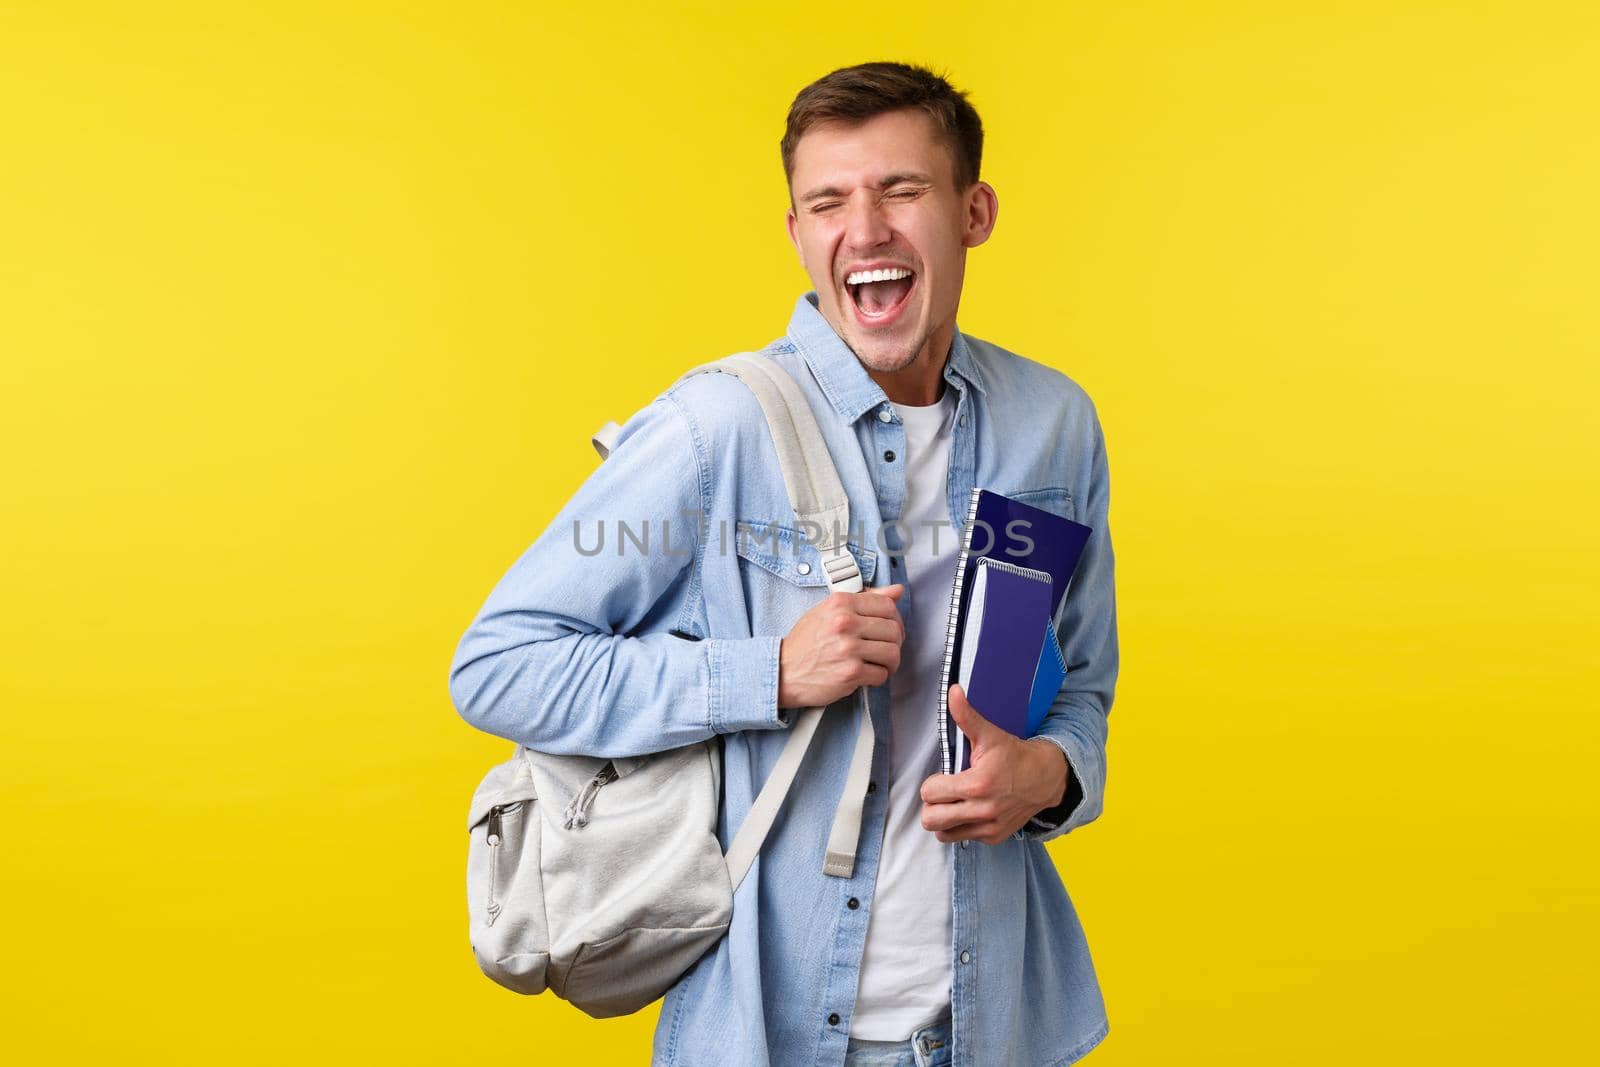 Education, courses and university concept. Joyful happy handsome male student enjoying life in campus, holding backpack and study material, laughing and smiling excited, yellow background.